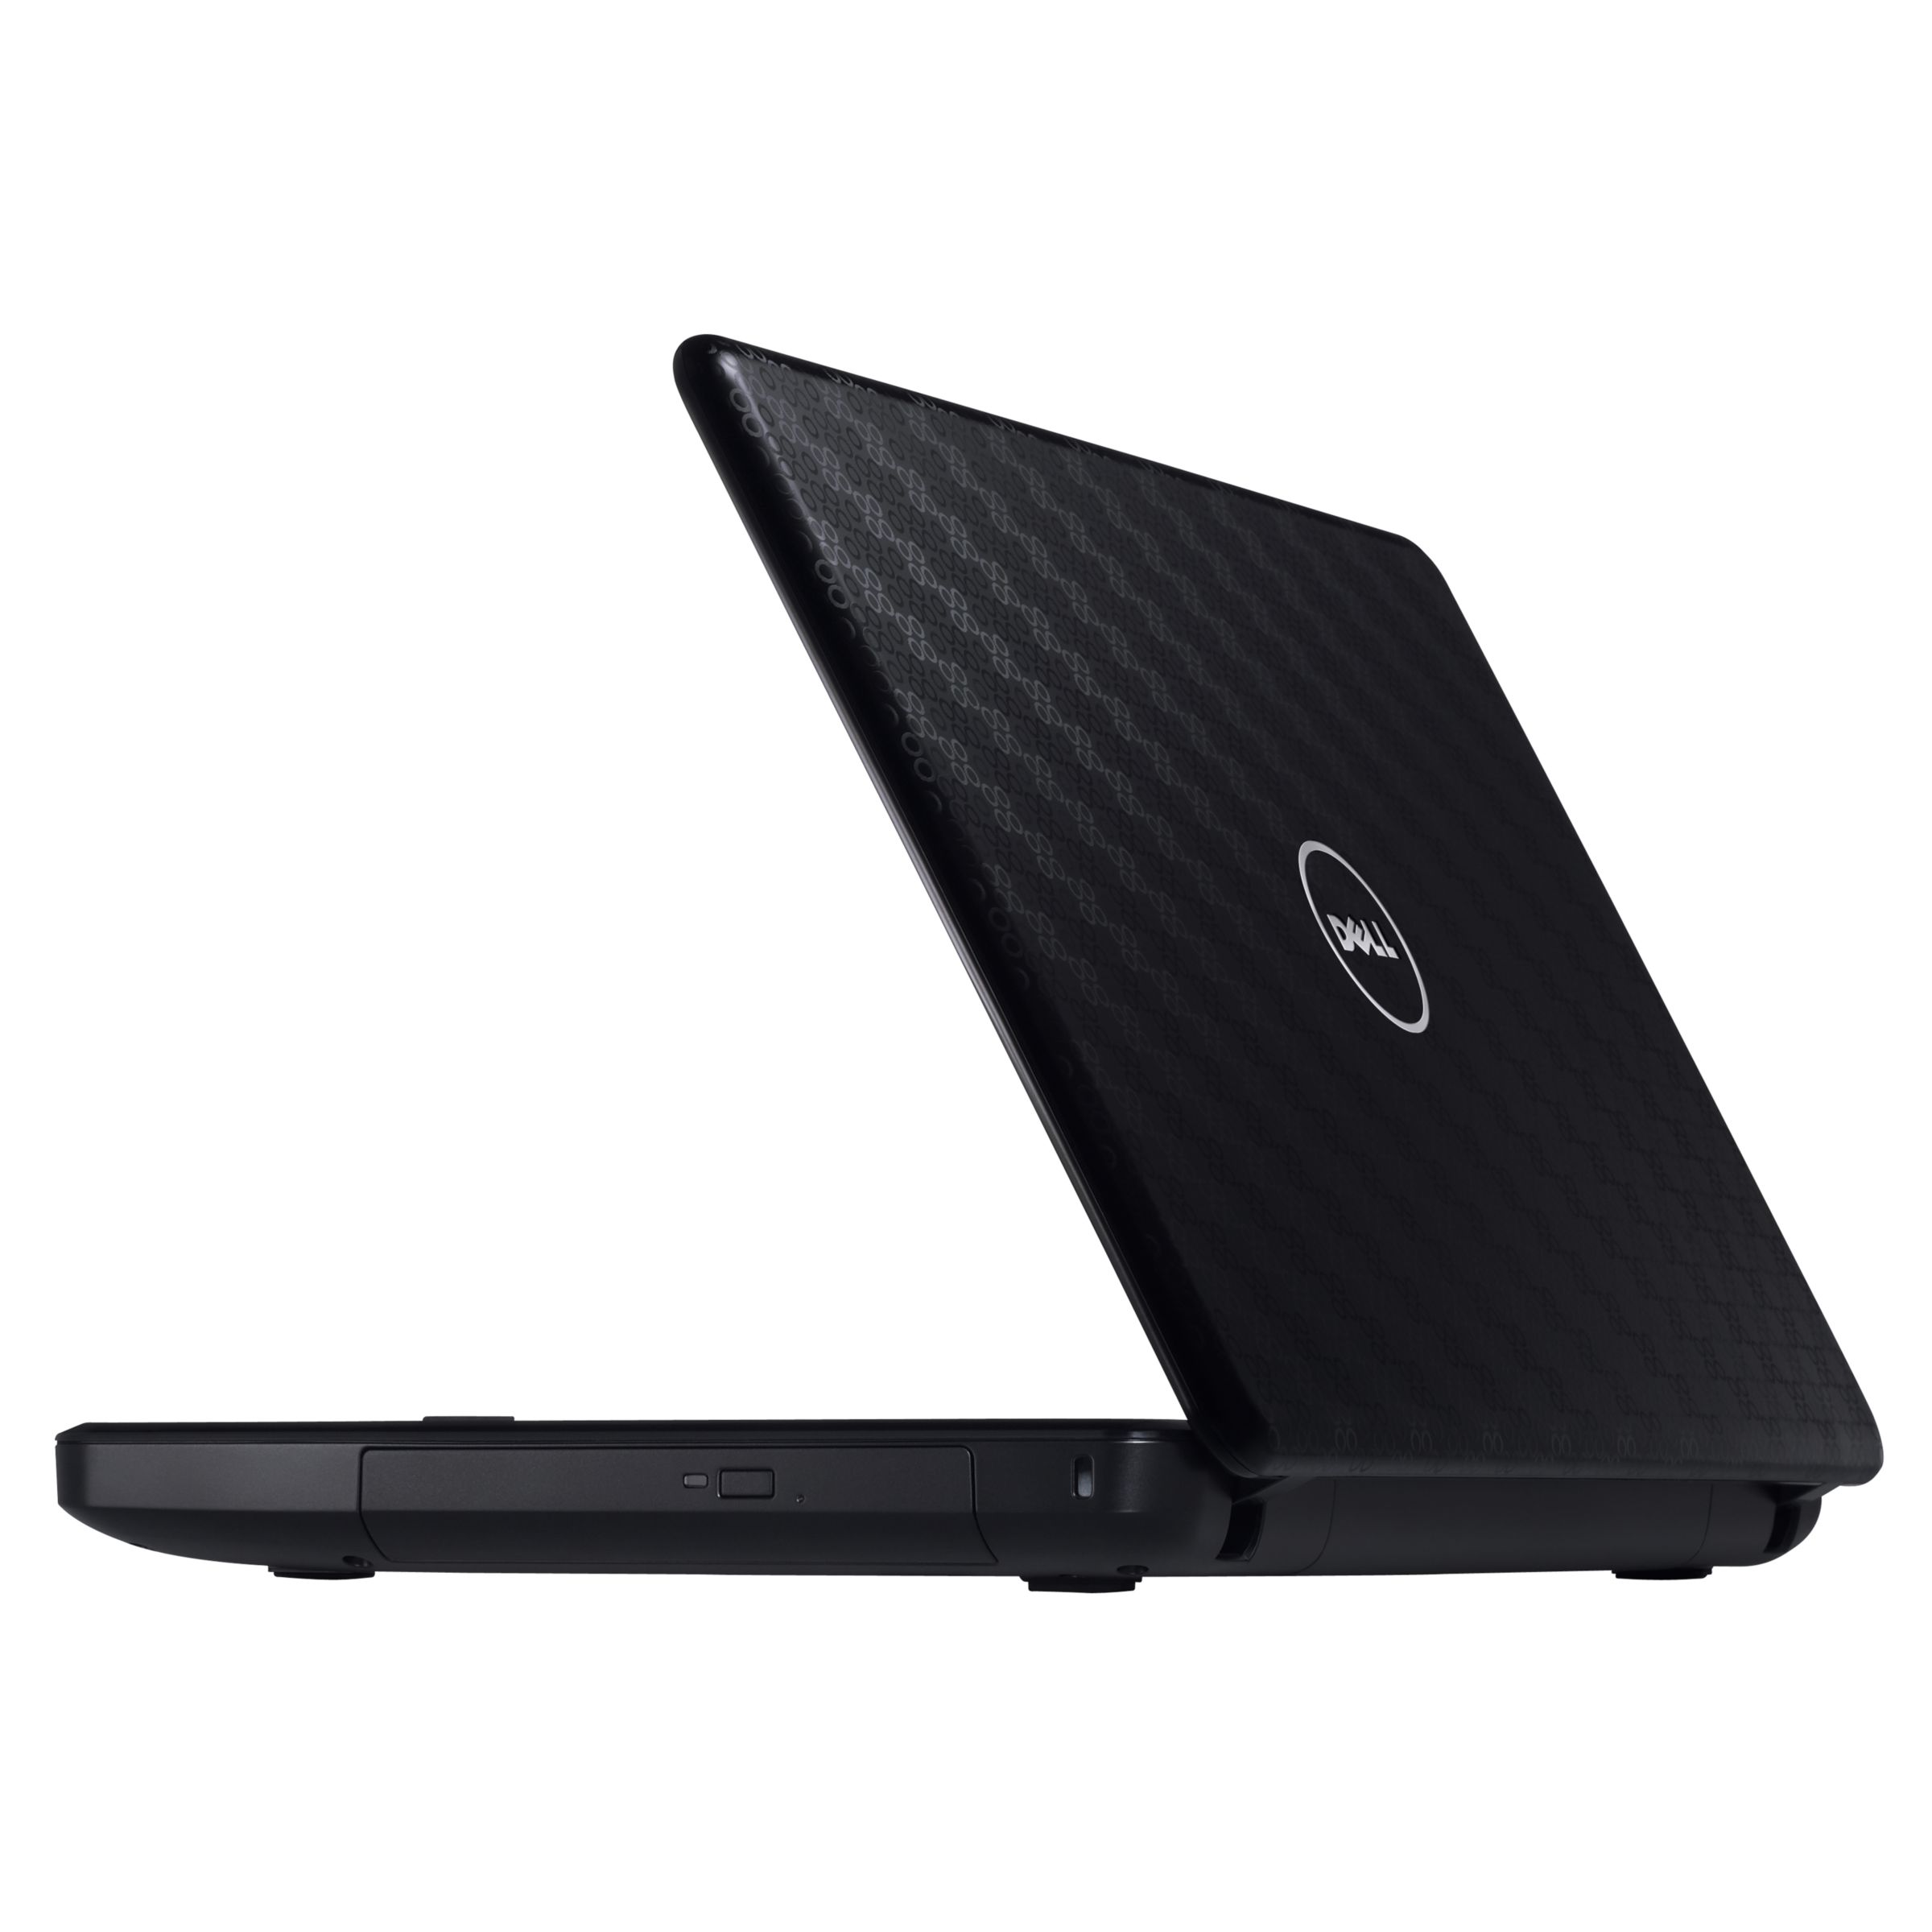 Dell Inspiron M5030 Laptop, AMD Athlon, 320GB, 2.2GHz, 3GB RAM with 15.6 Inch Display at John Lewis